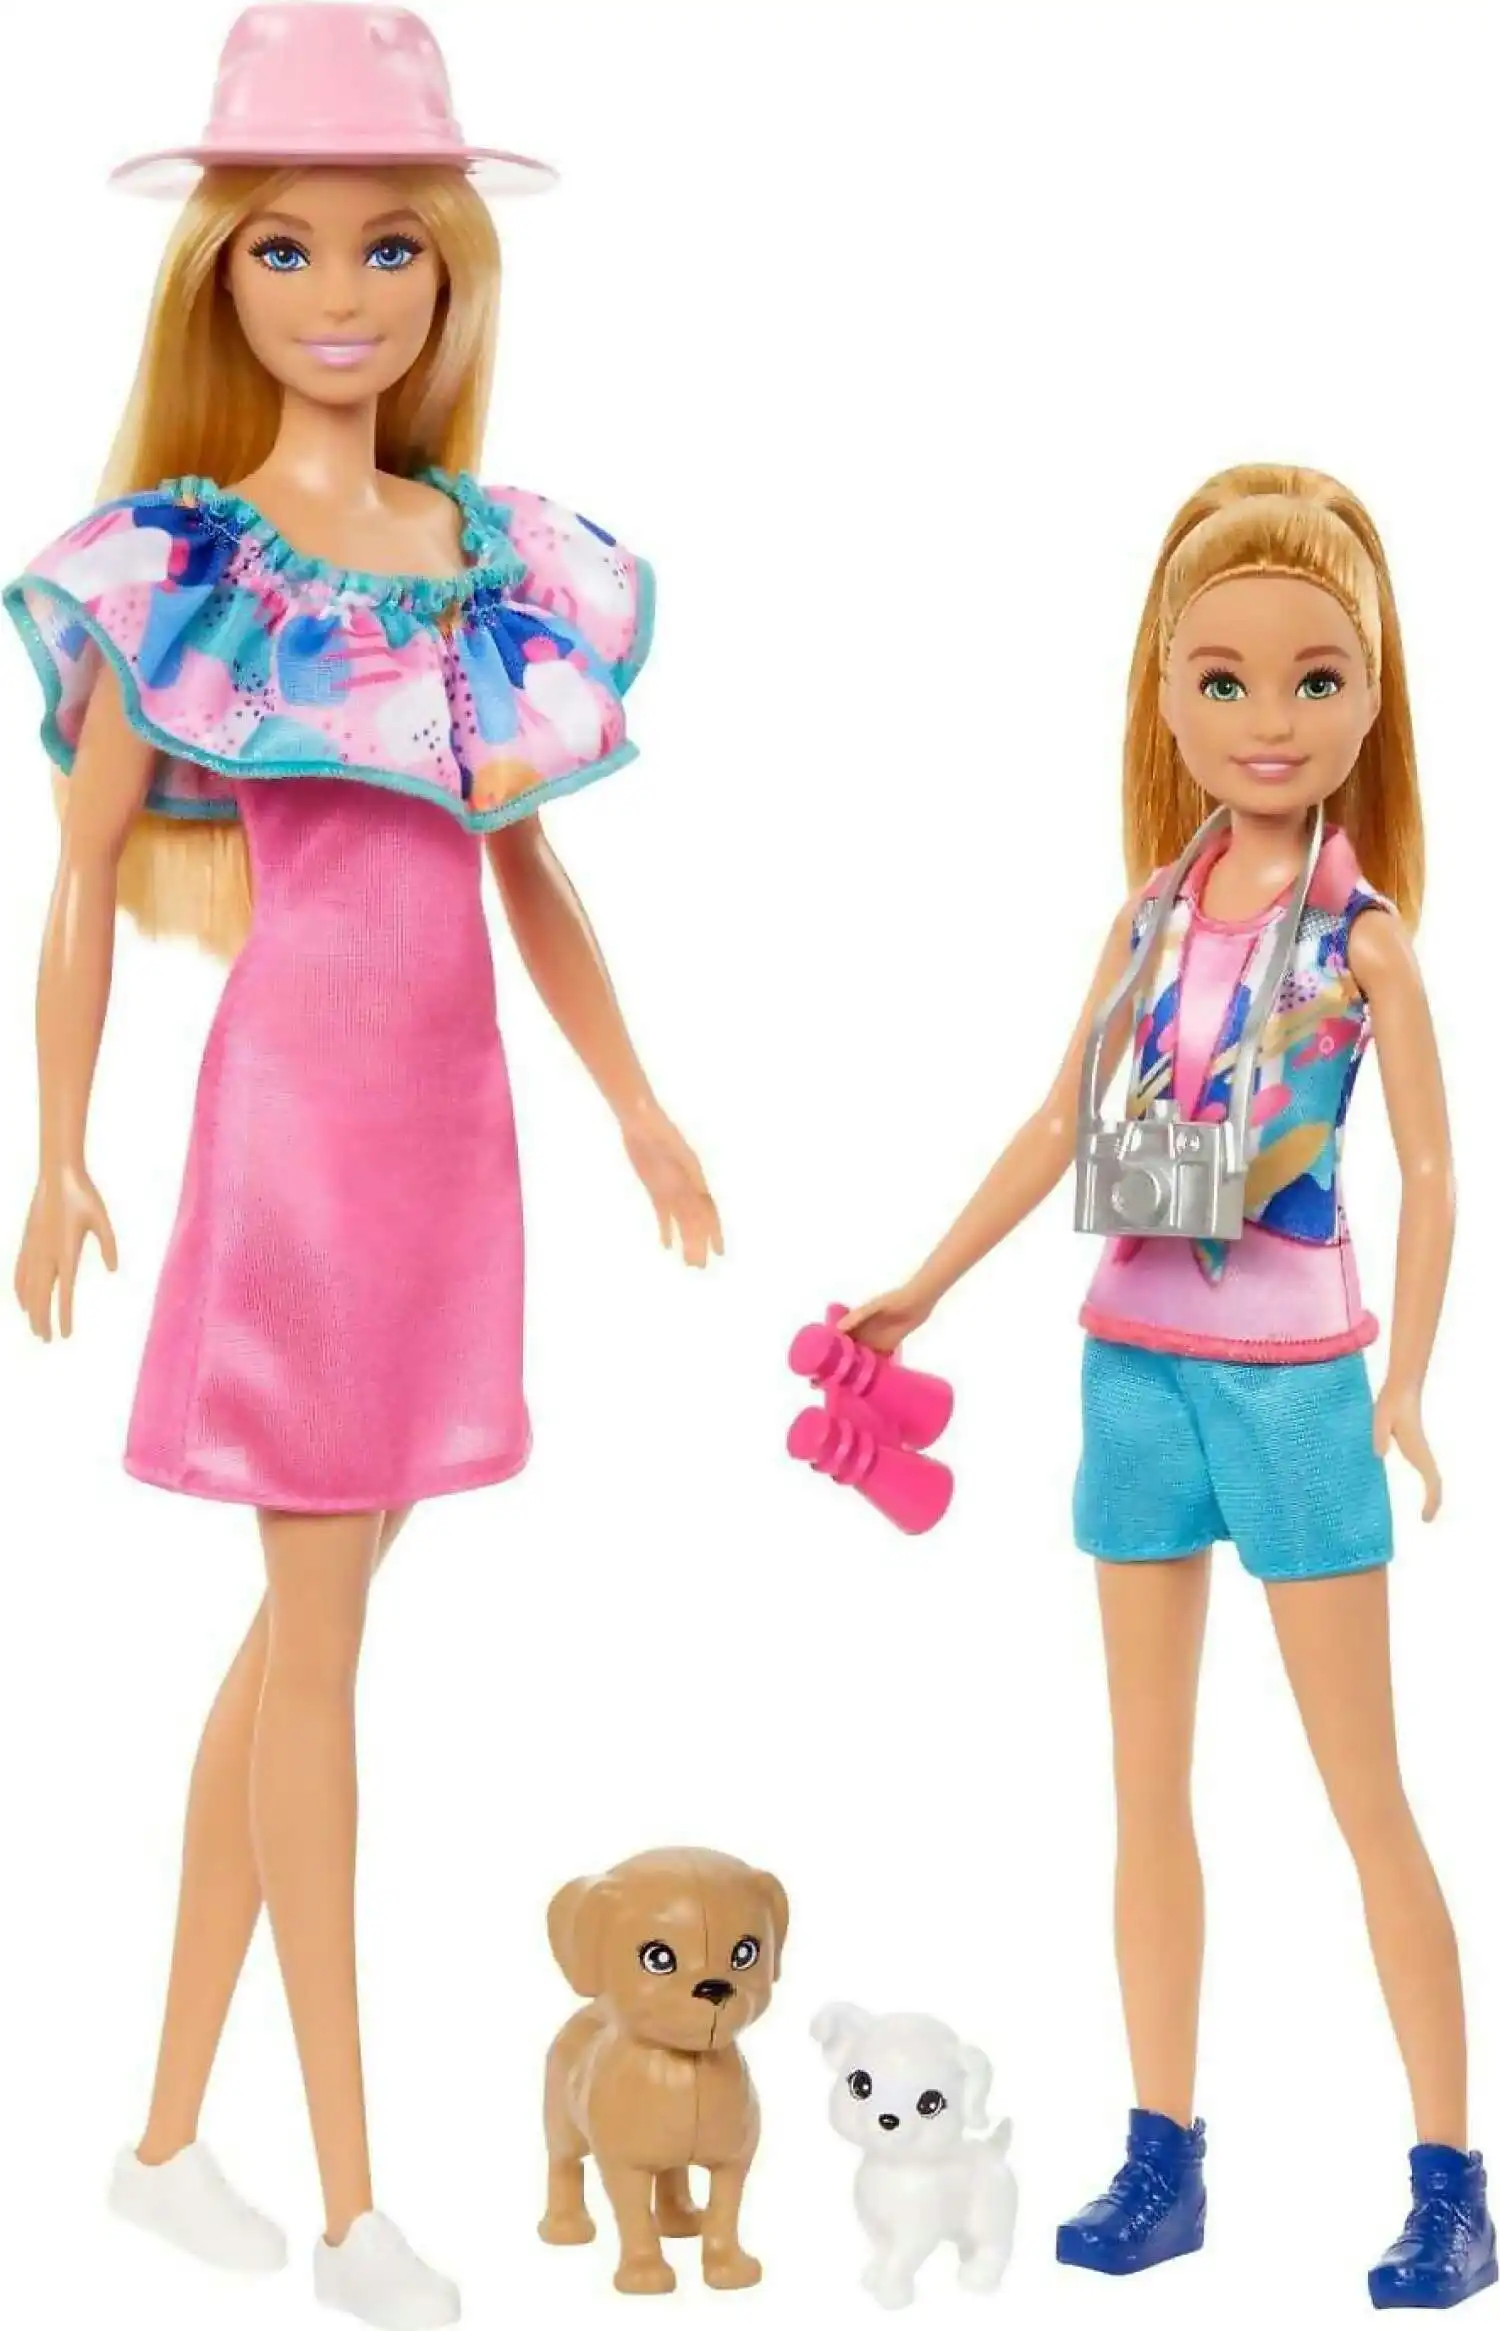 Barbie - Barbie & Stacie Sister Doll Set With 2 Pet Dogs & Accessories - Mattel